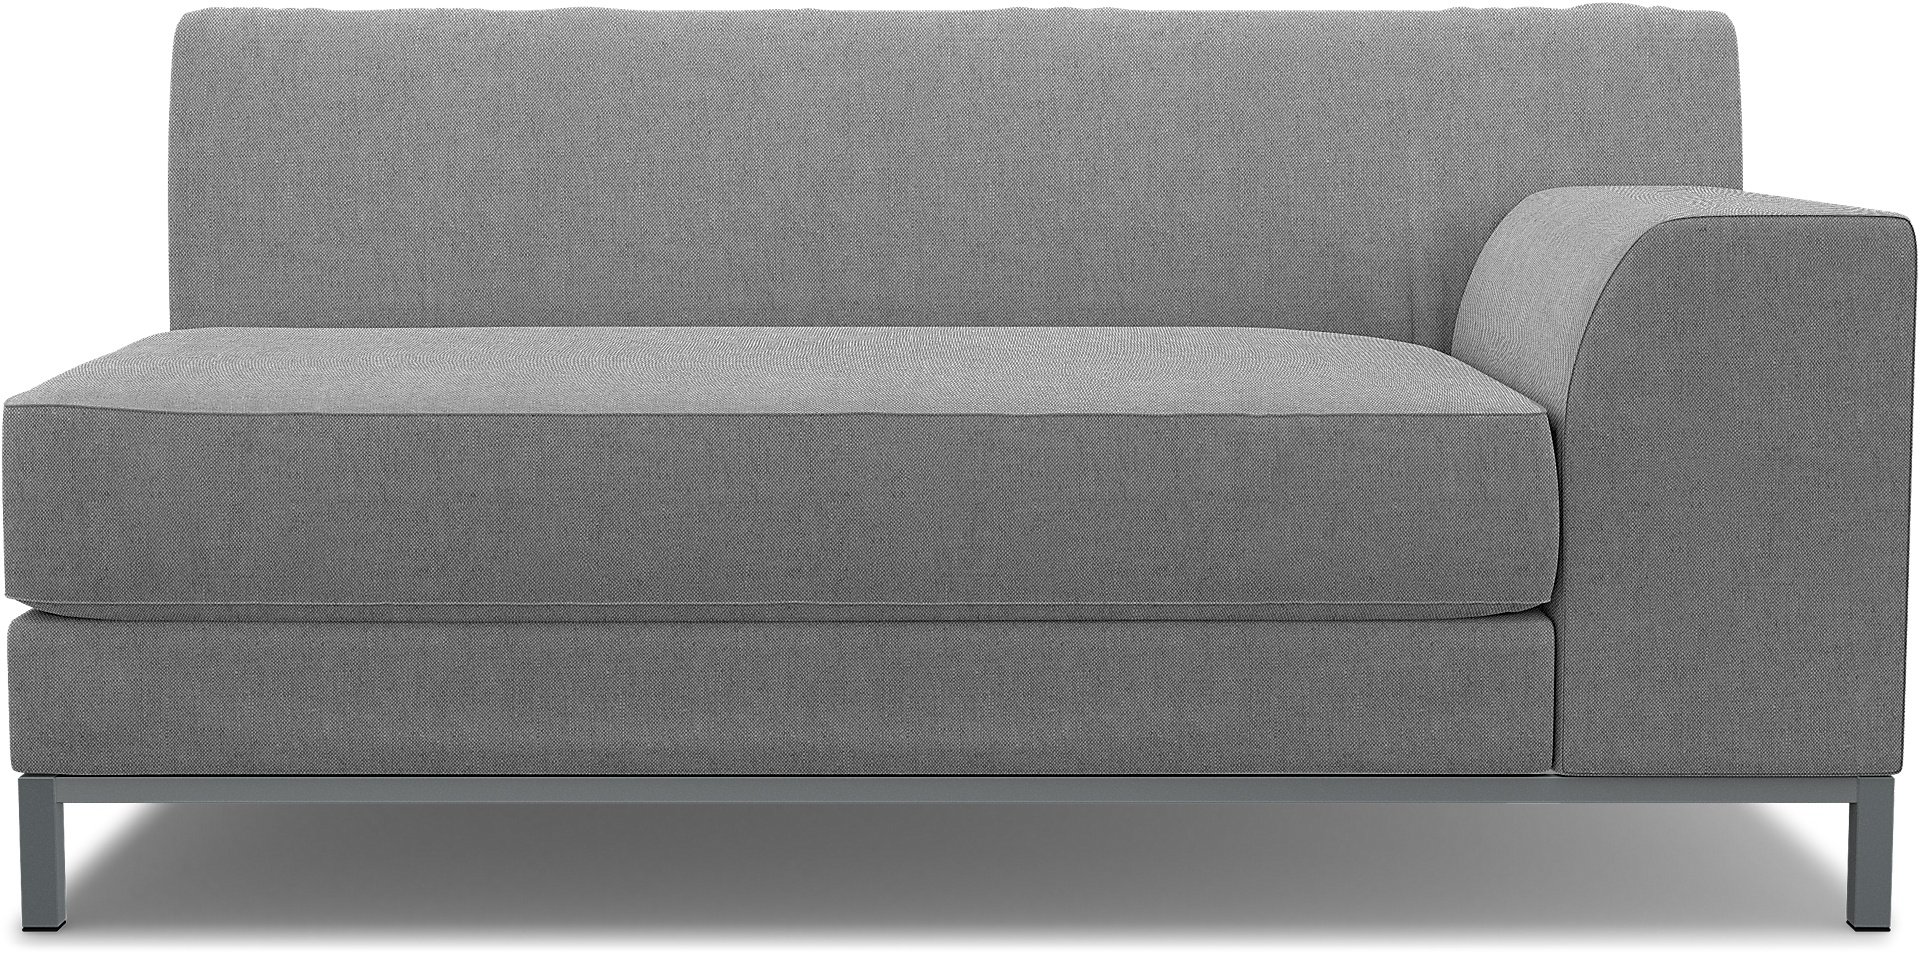 IKEA - Kramfors 2 Seater Sofa with Right Arm Cover, Graphite, Linen - Bemz